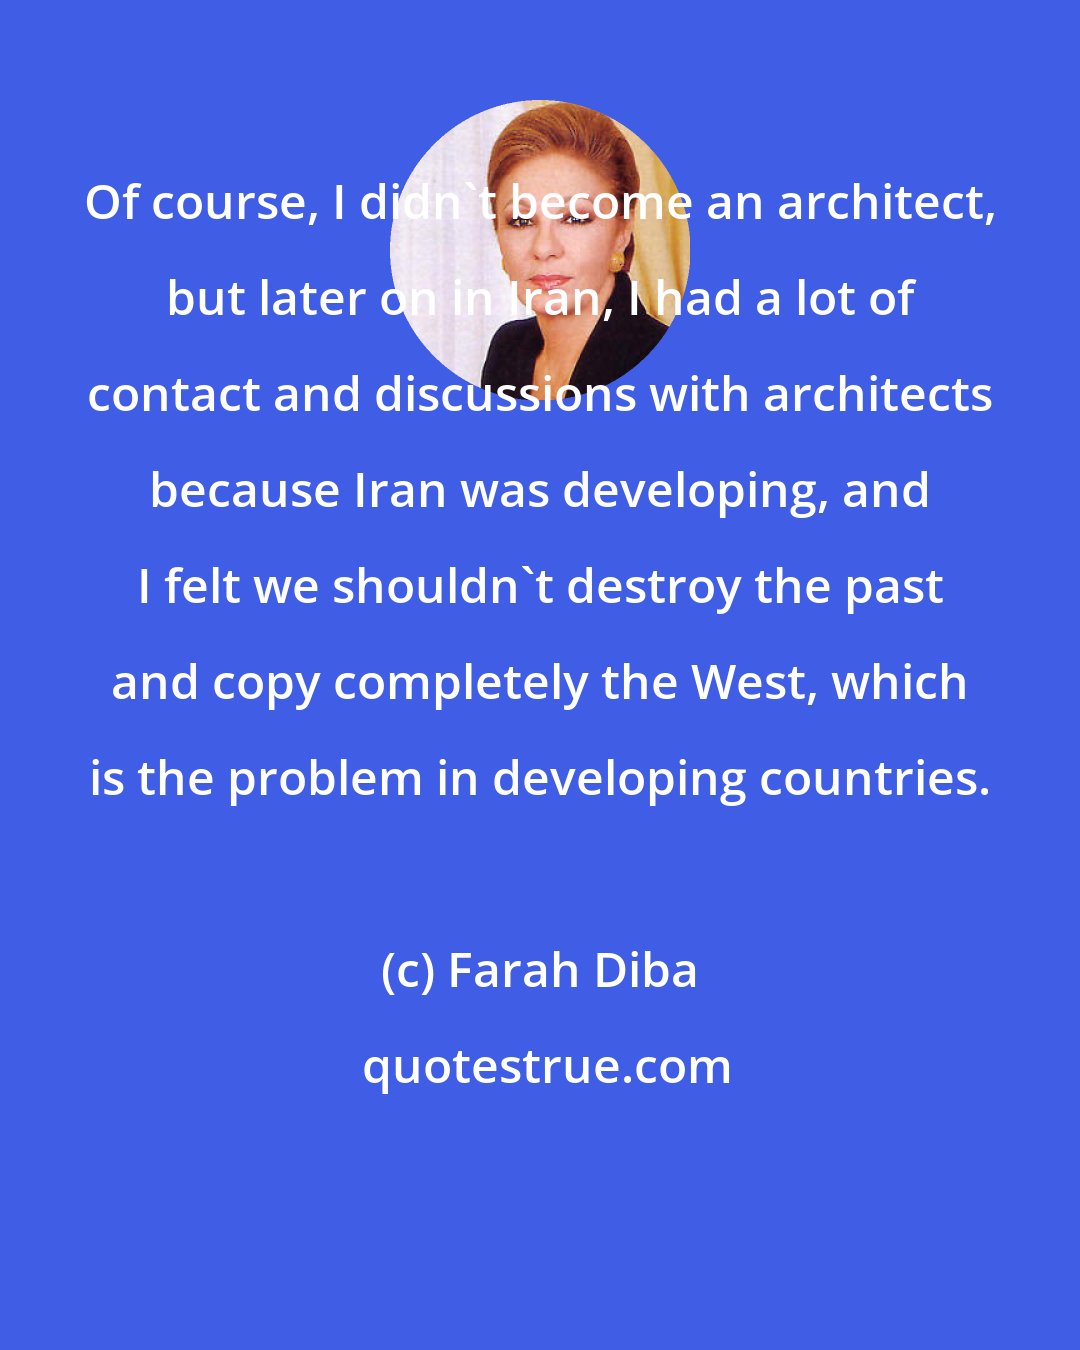 Farah Diba: Of course, I didn't become an architect, but later on in Iran, I had a lot of contact and discussions with architects because Iran was developing, and I felt we shouldn't destroy the past and copy completely the West, which is the problem in developing countries.